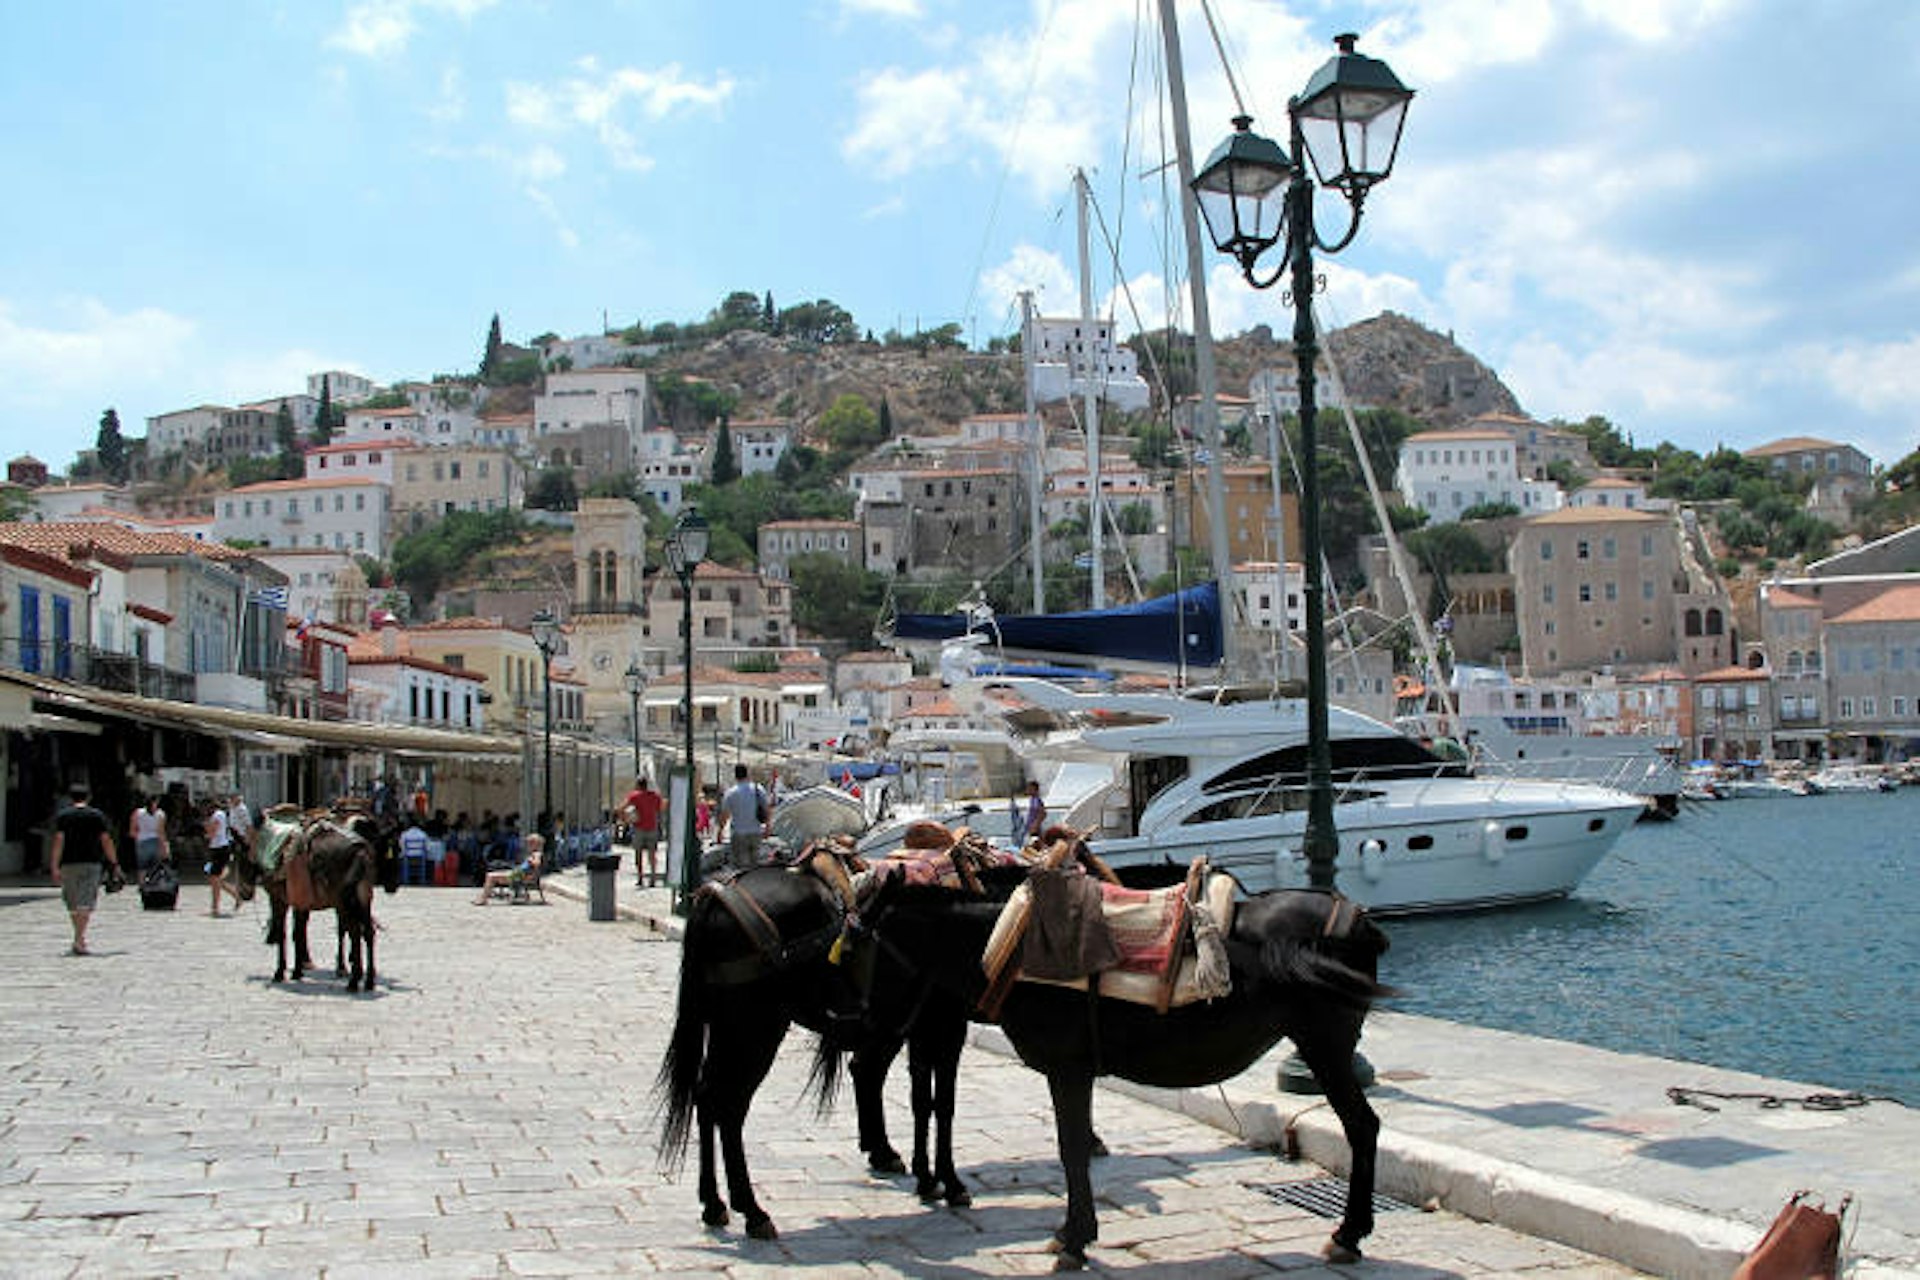 Famous donkeys in Hydra’s port. Image by Francisco Anzola / CC BY 2.0